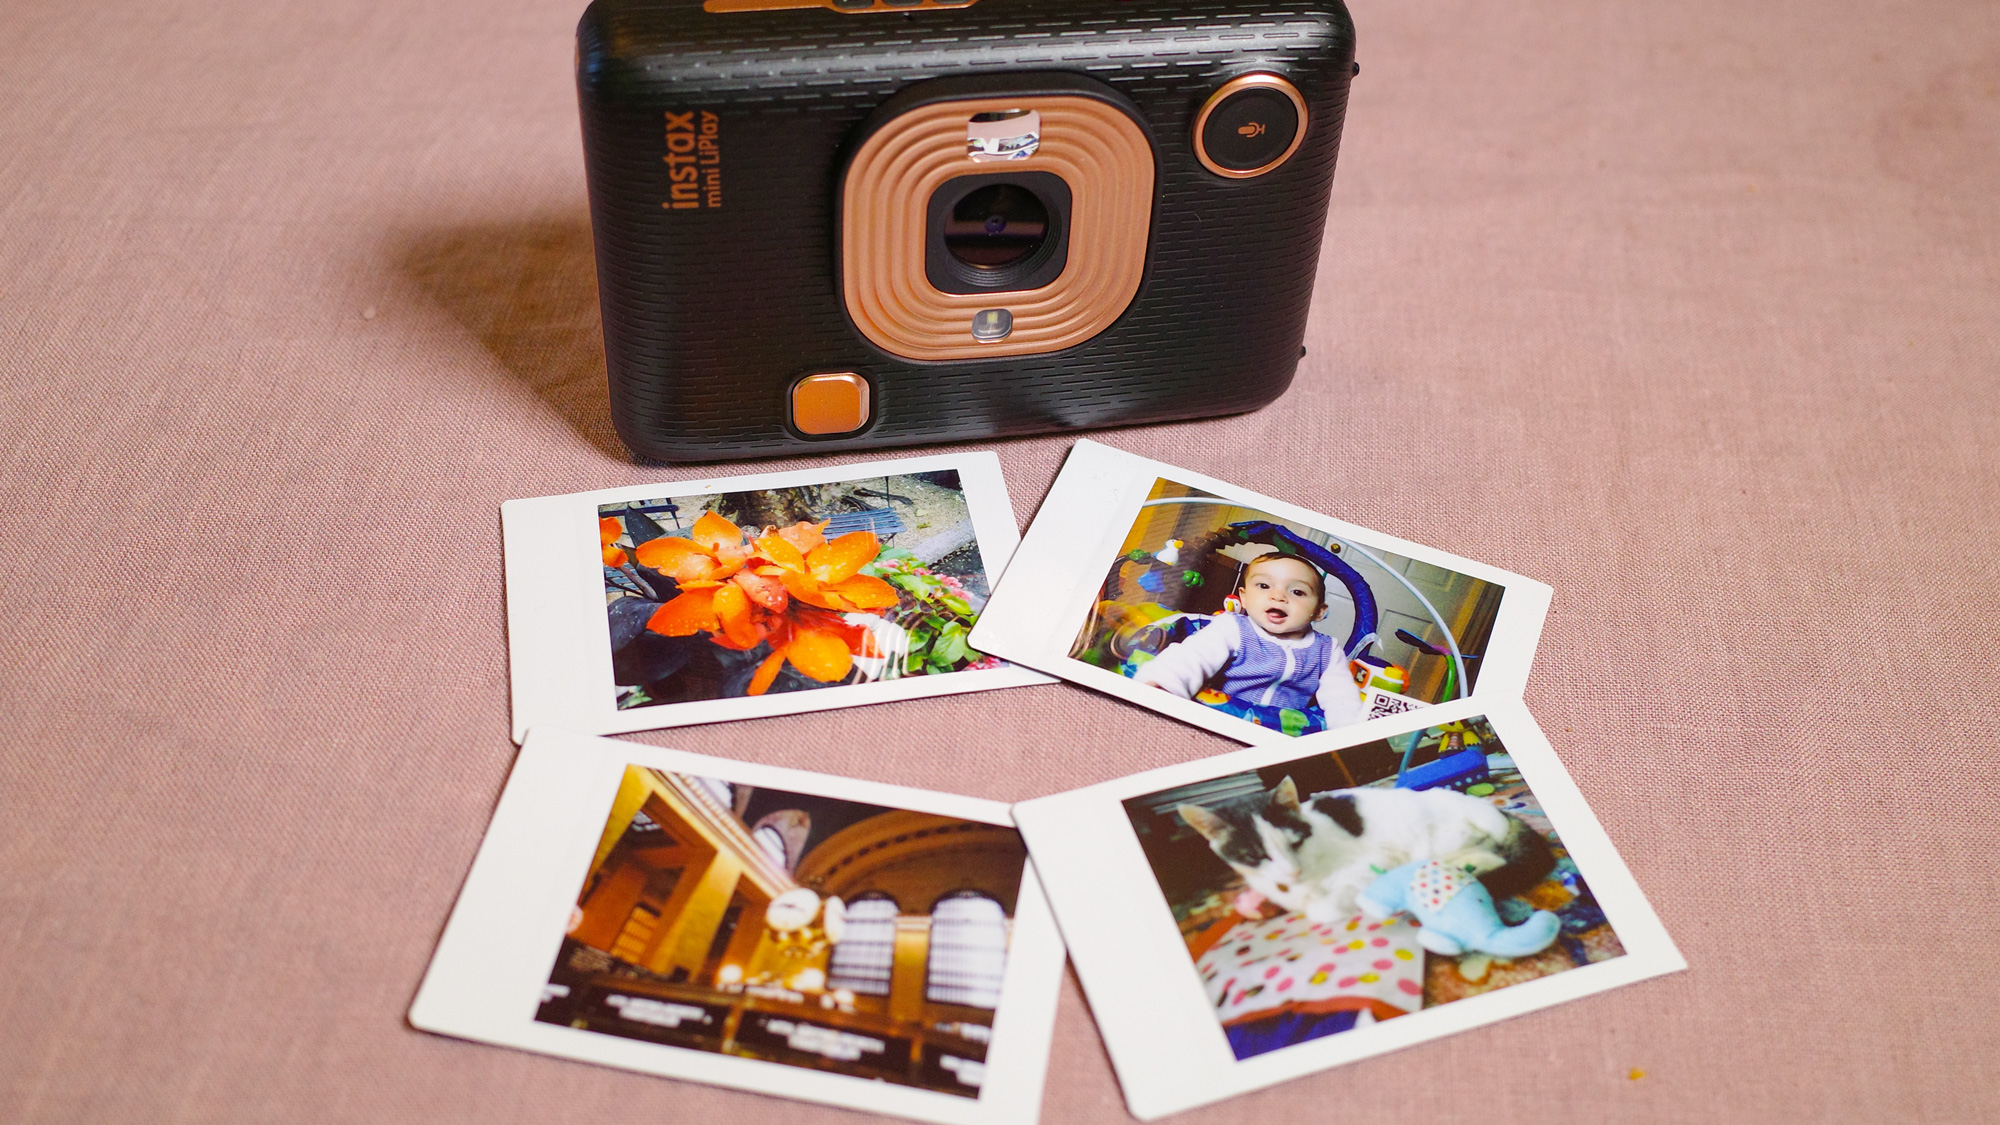 Fujifilm Instax mini LiPlay: This Instant Camera Is Too Clever